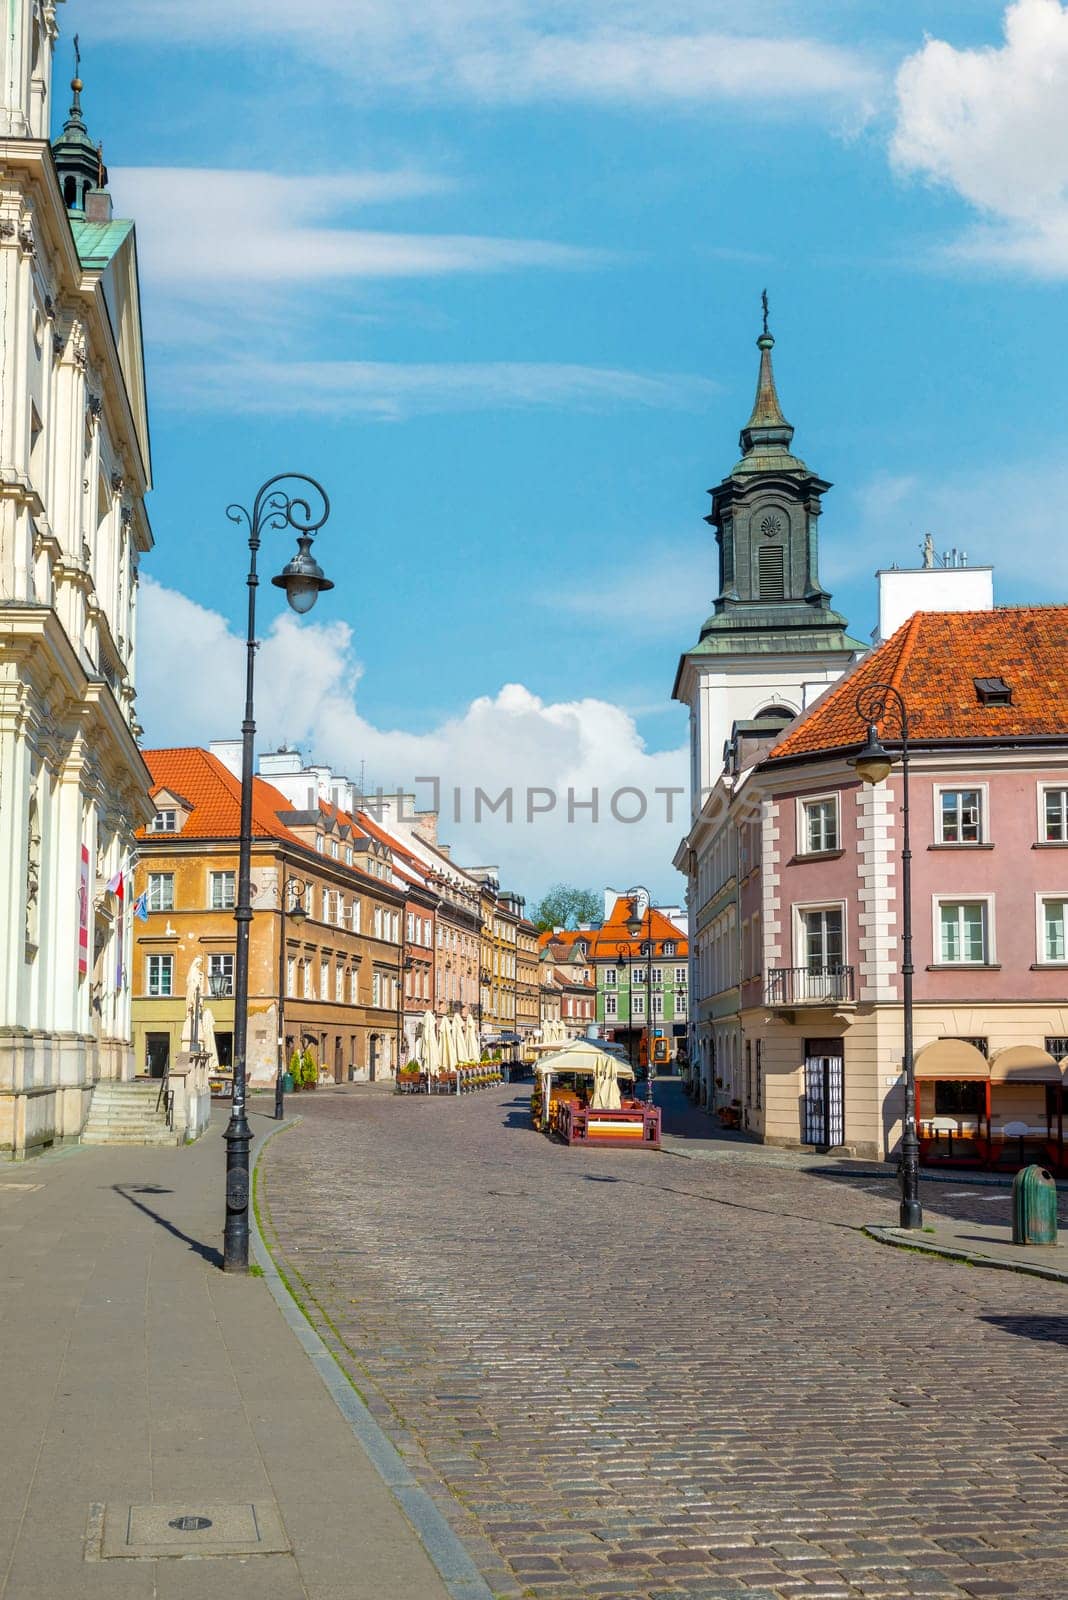 The old town street in Warsaw, Poland